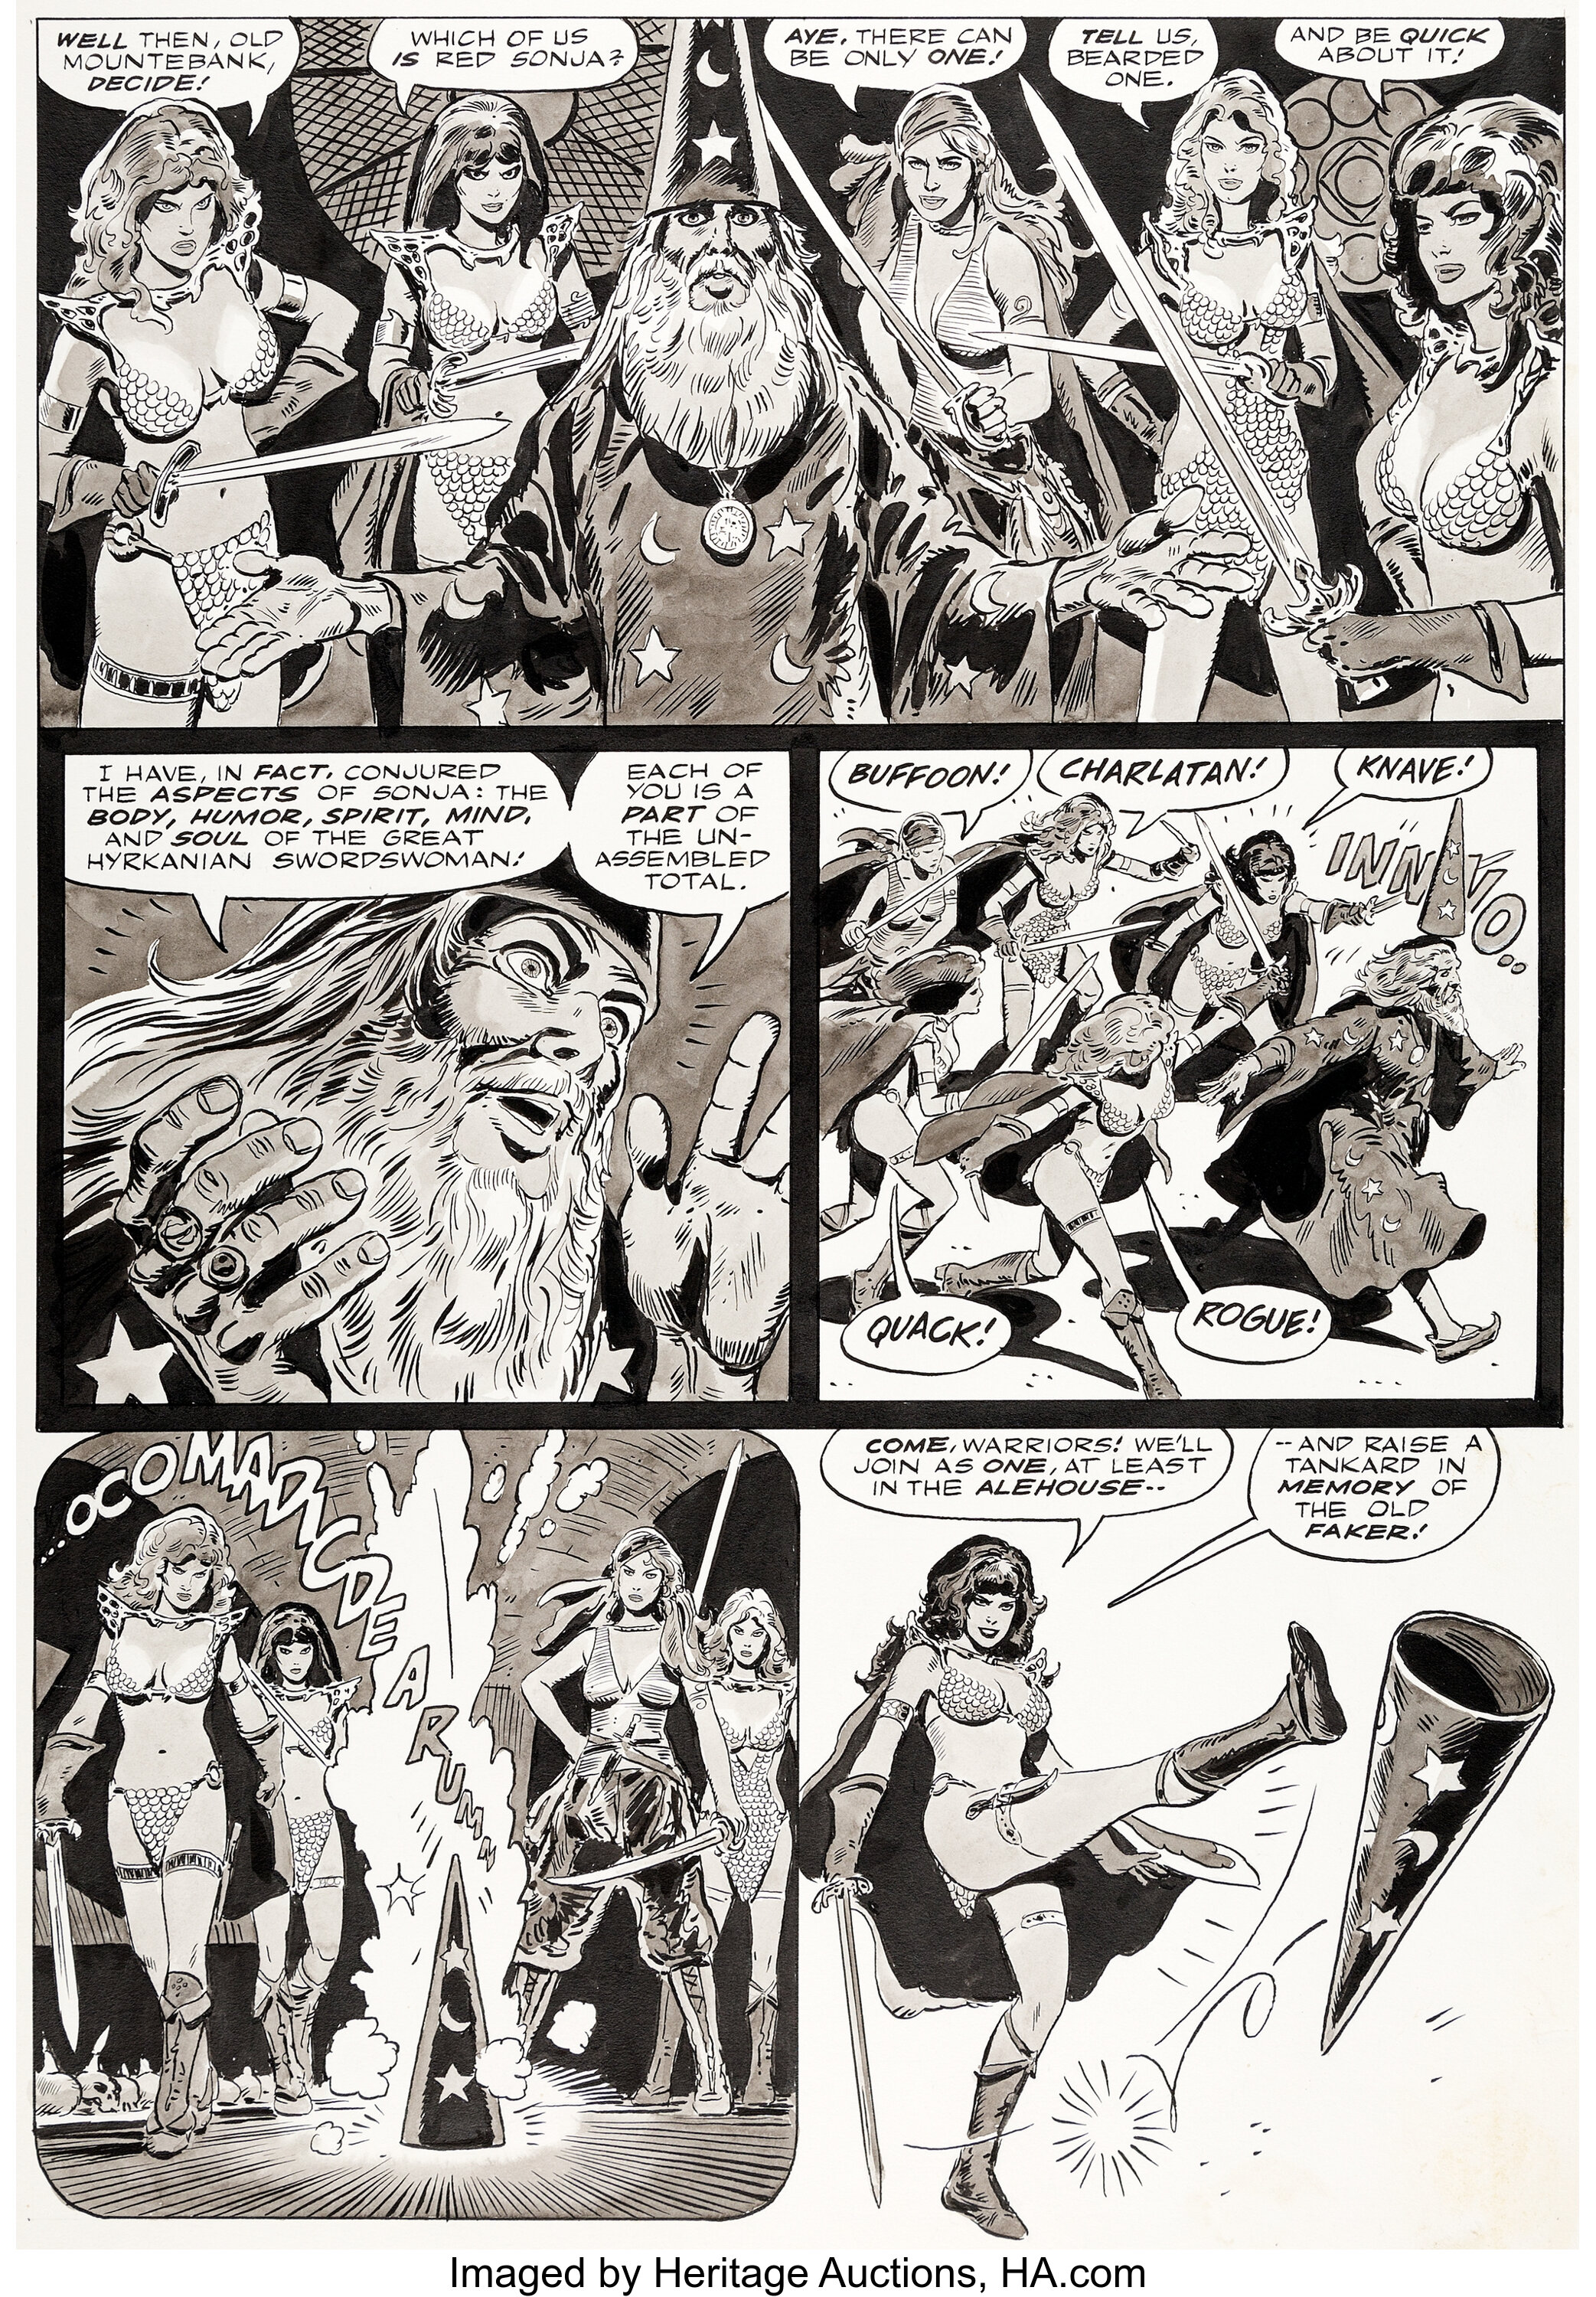 Frank Thorne Savage Sword of Conan #29 Story Page 15 Red Sonja Lot #93249 | Heritage Auctions